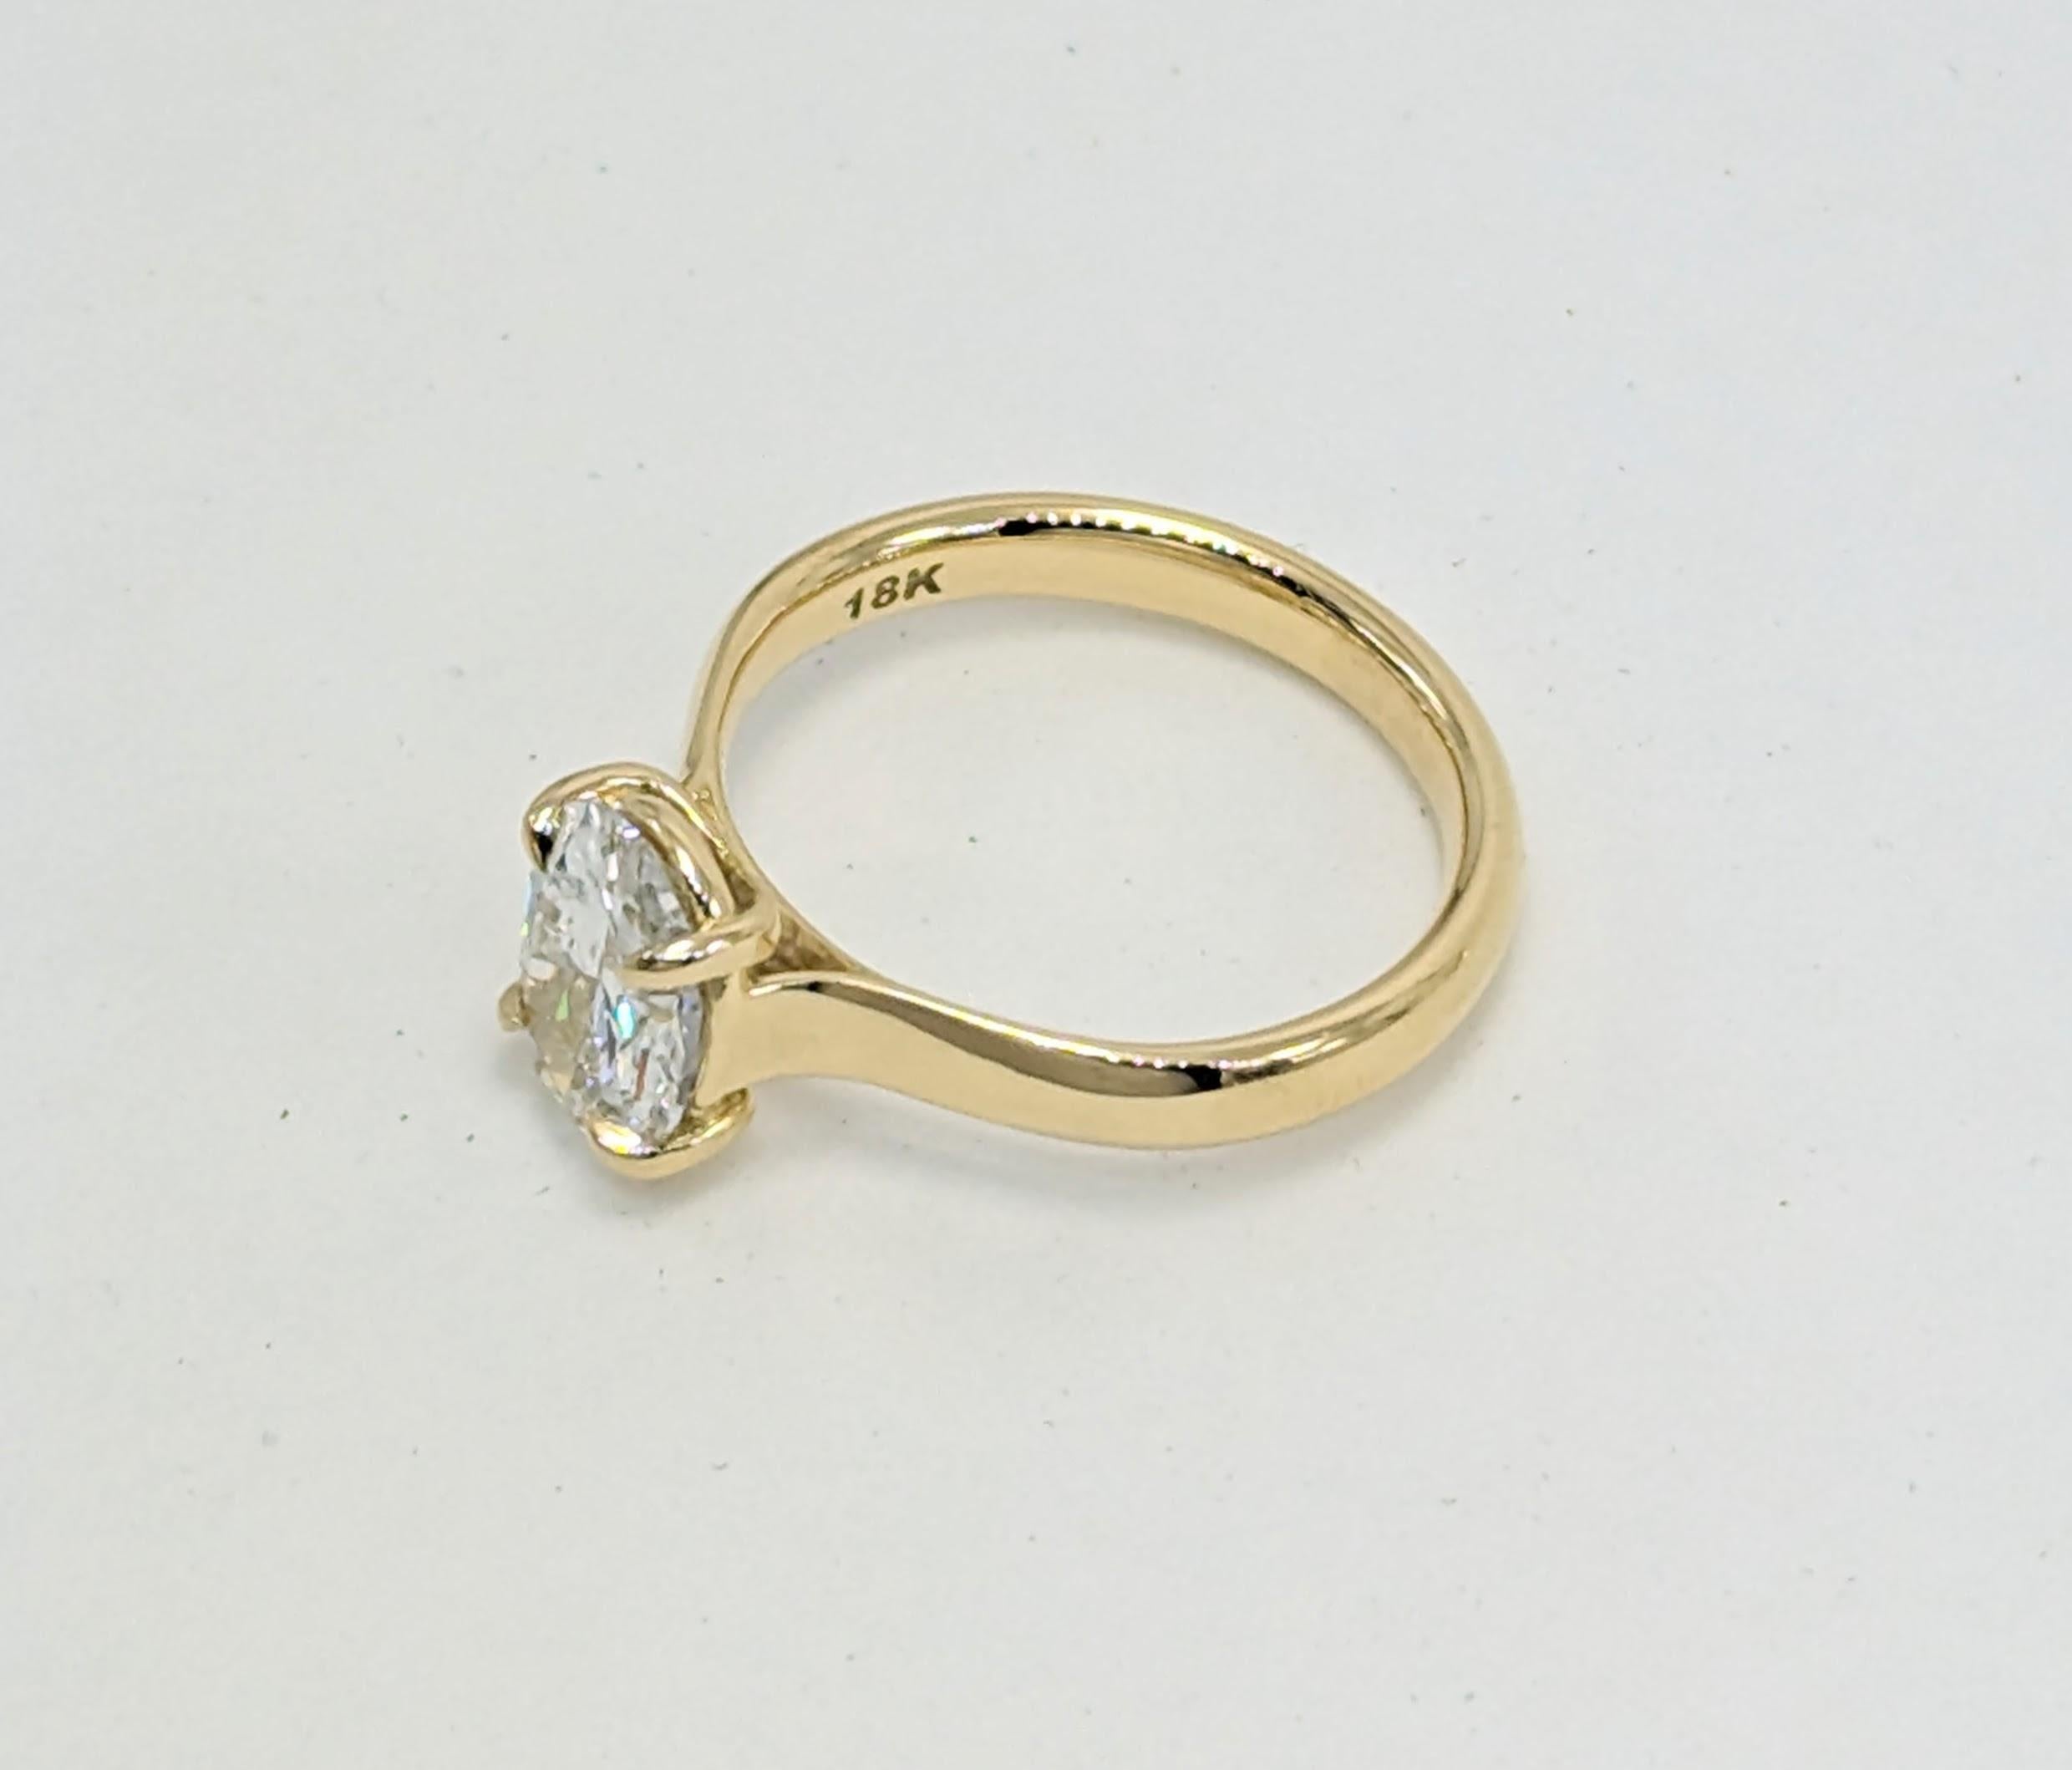 For Sale:  GIA 1.51 Certified Diamond  Engagement Ring in 18 Karat Gold 5